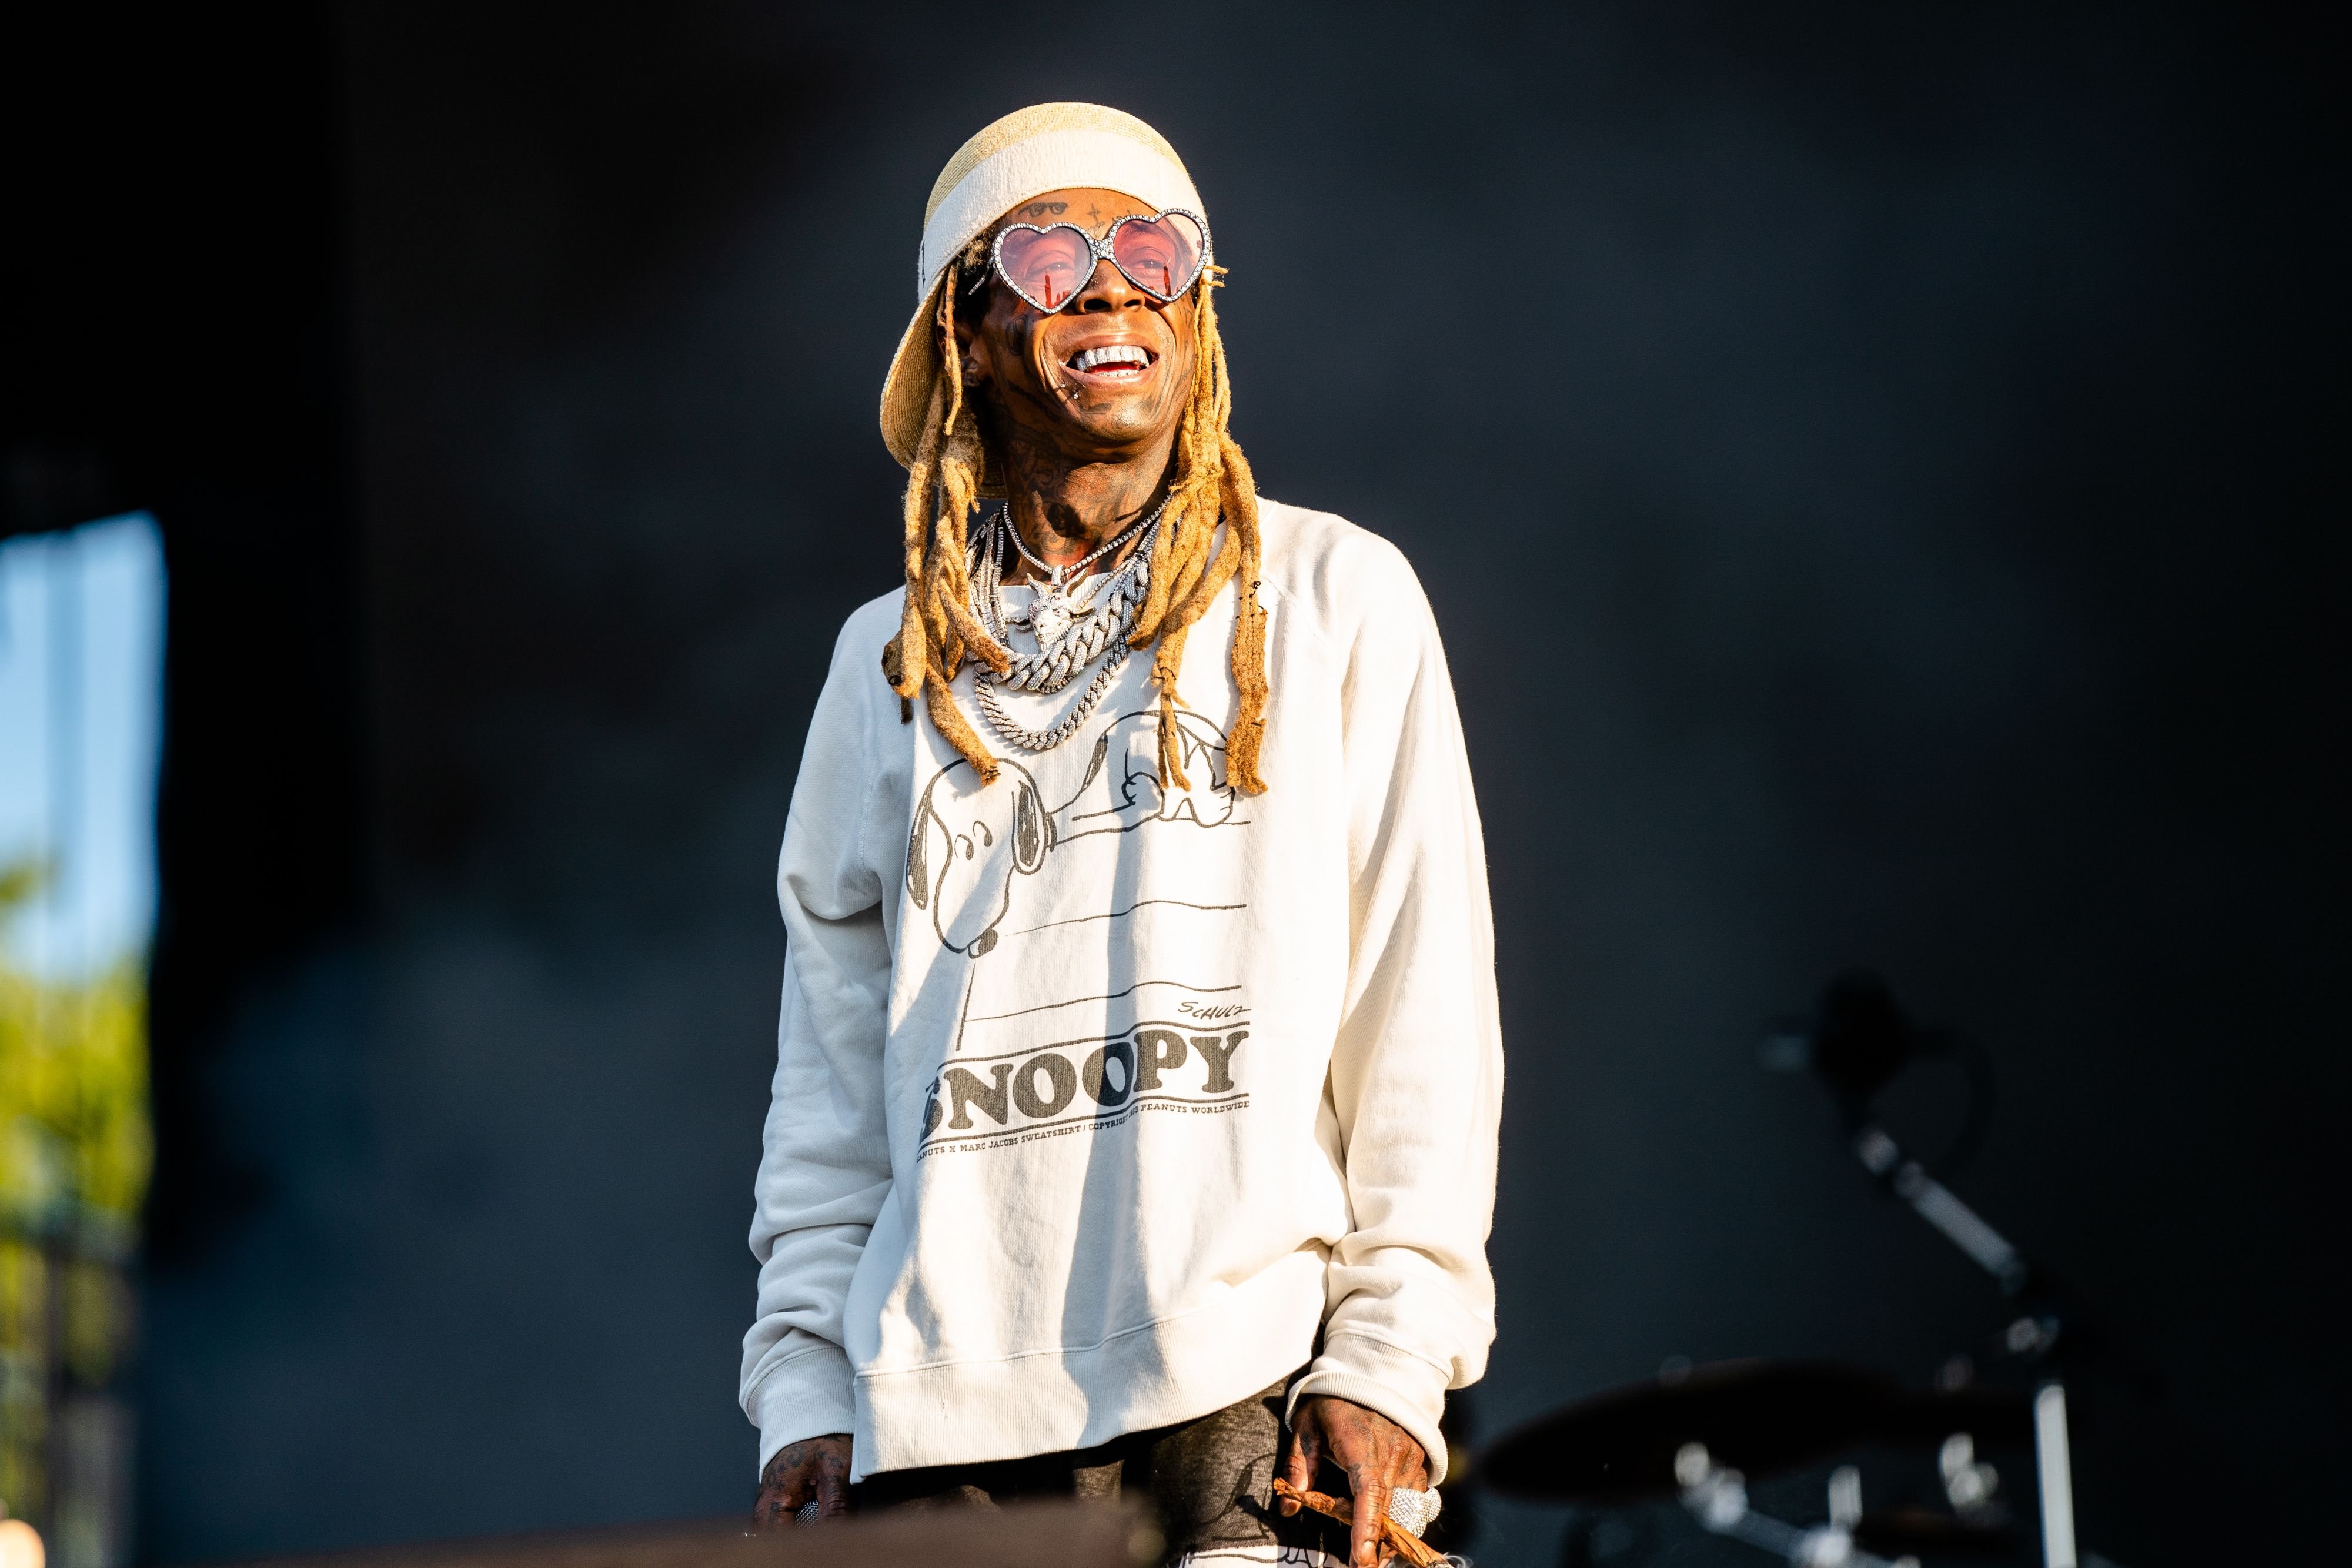 Lil Wayne at the Lollapalooza Music Festival at Grant Park on August 03, 2019 | Photo: Getty Images